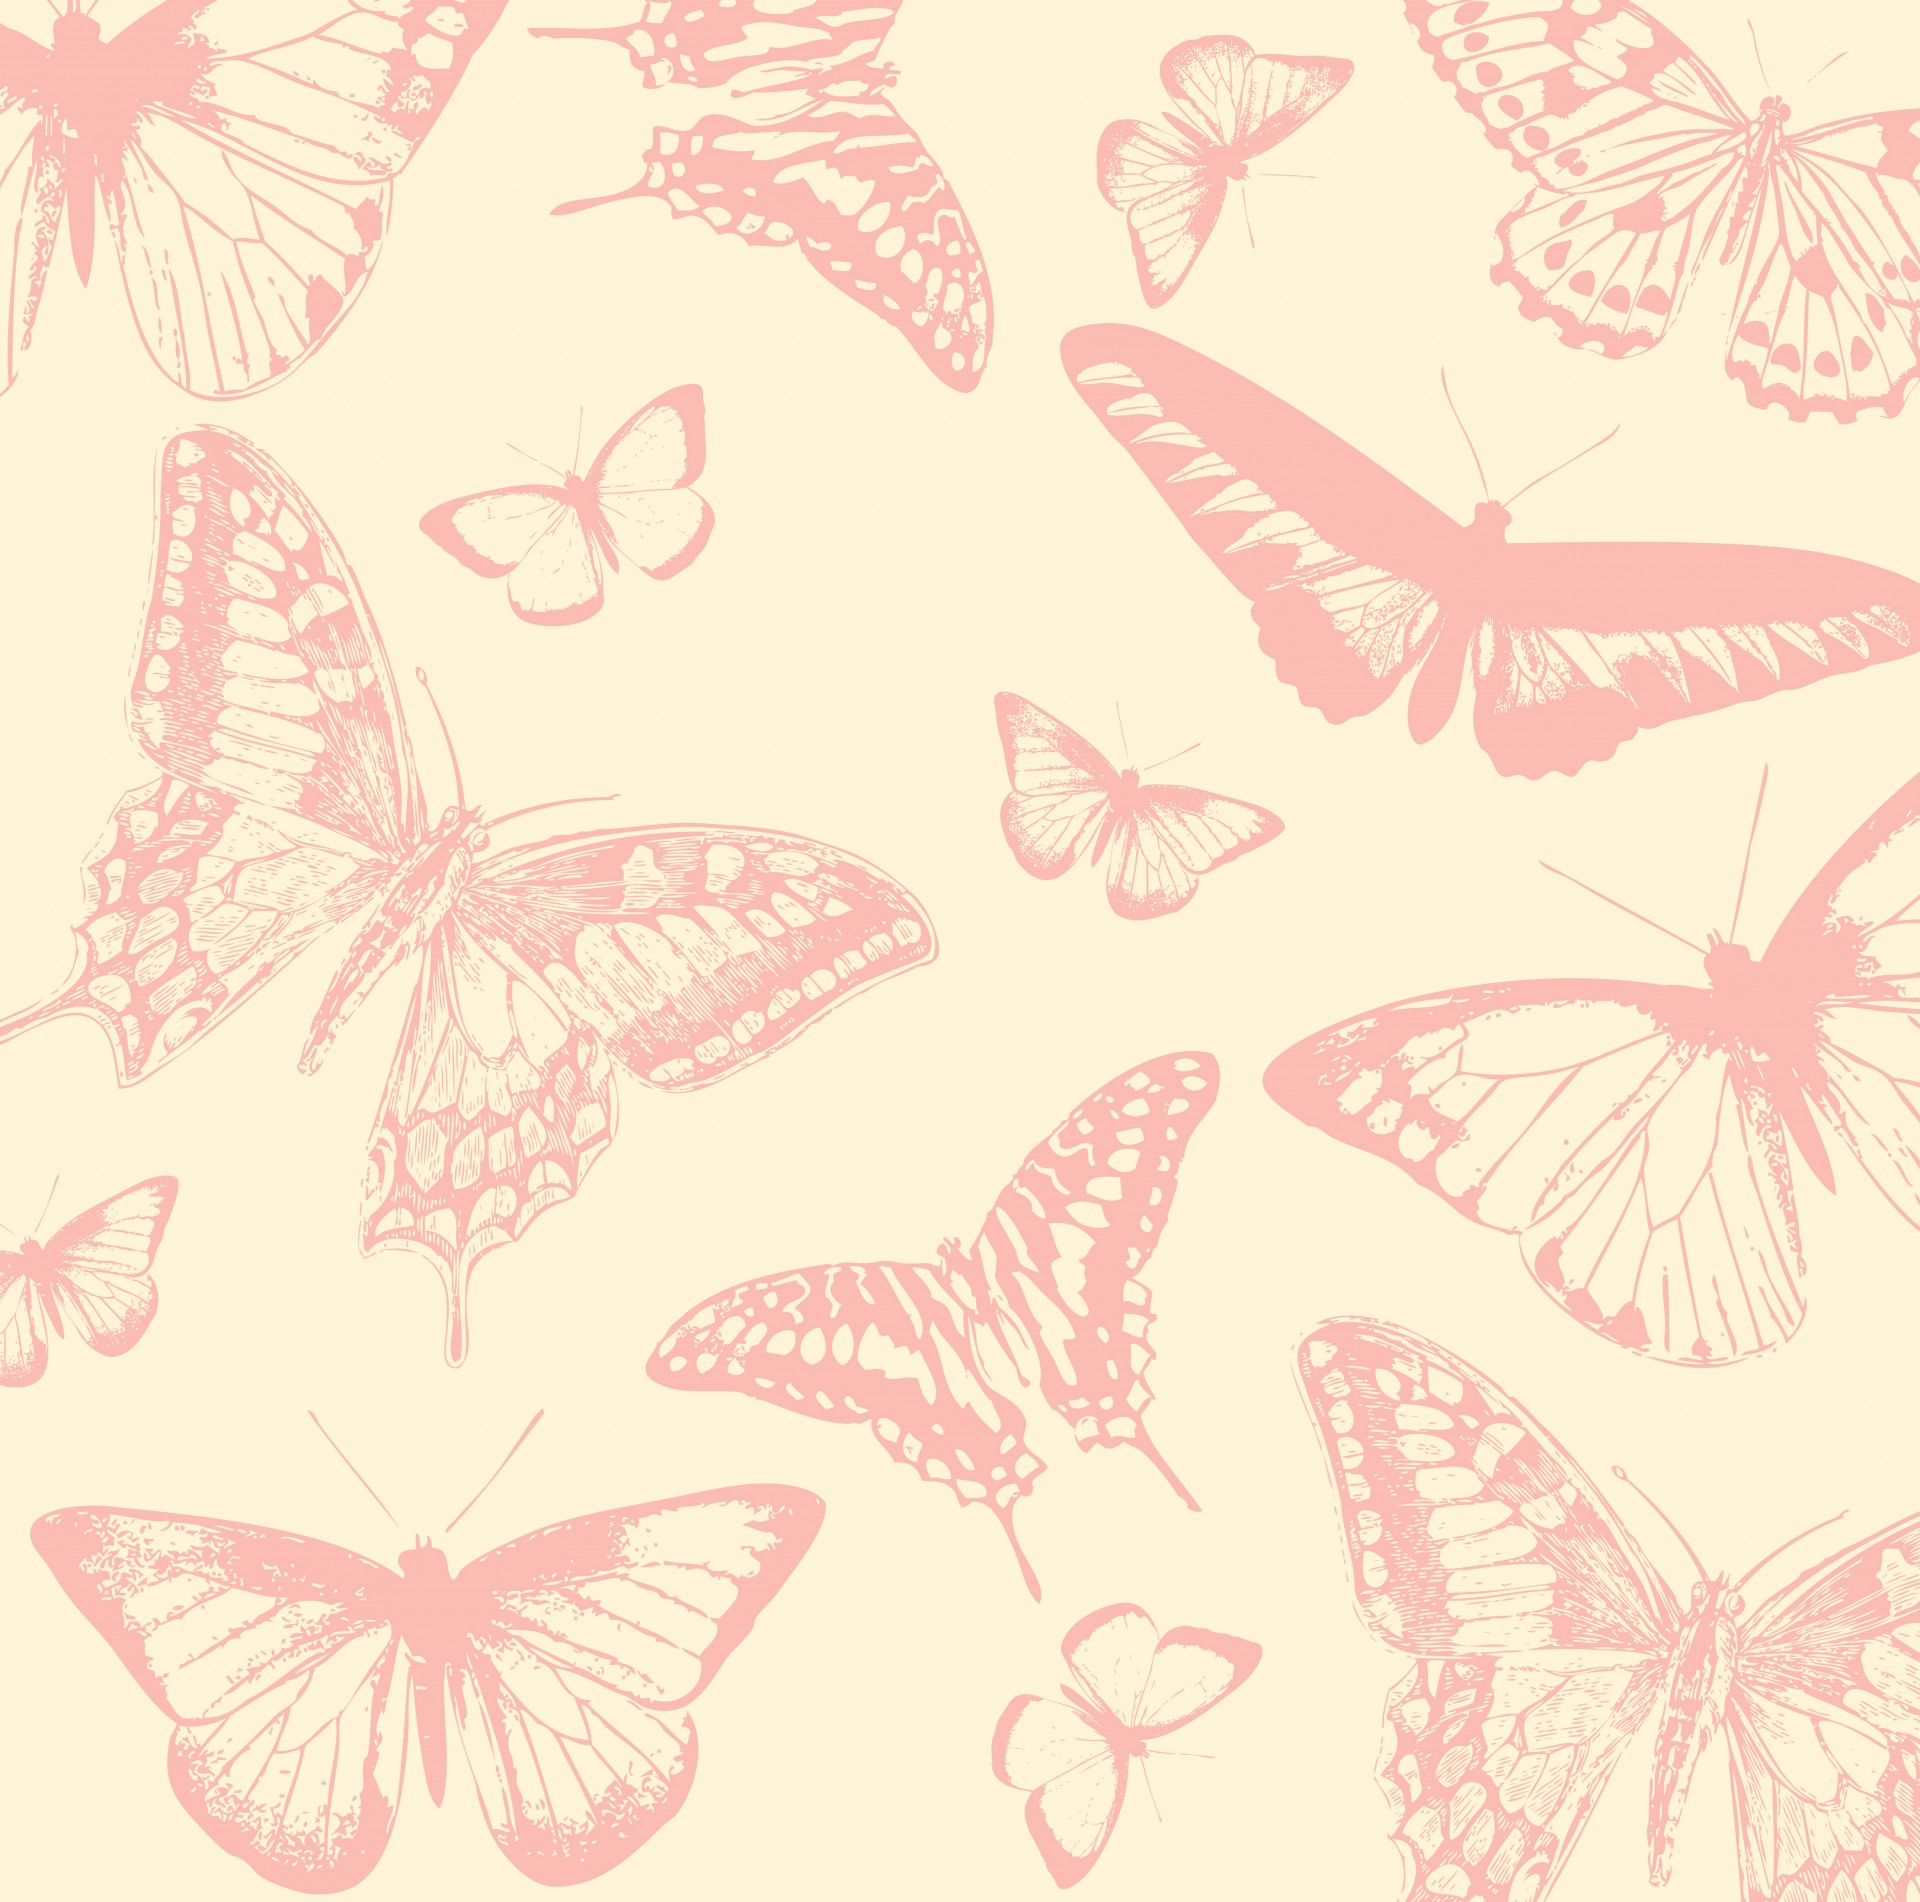 Butterfly Background Vintage Style